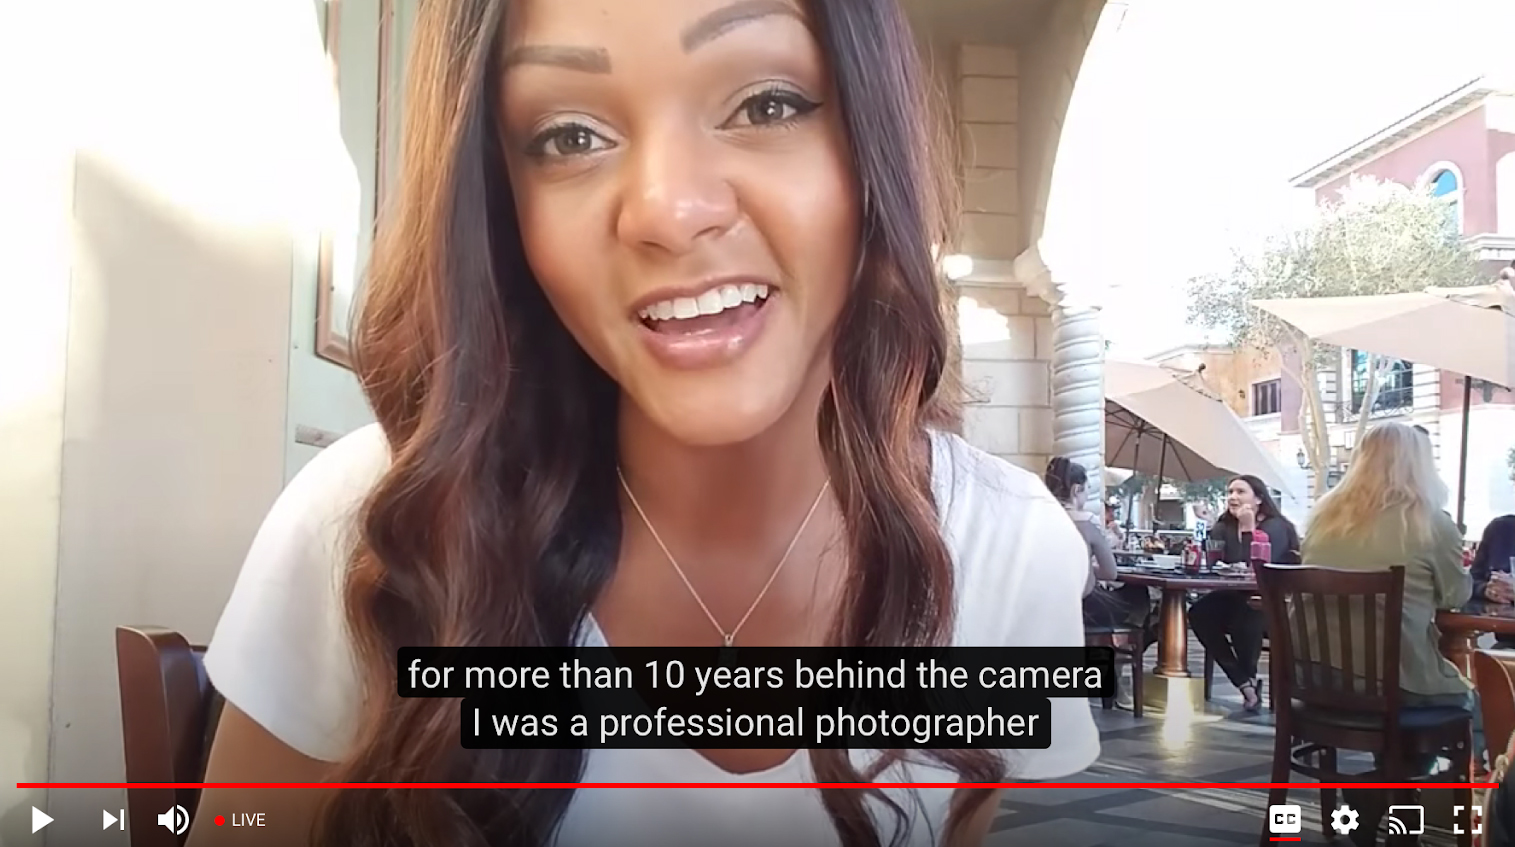 YouTube enables automatic captions for live broadcasts